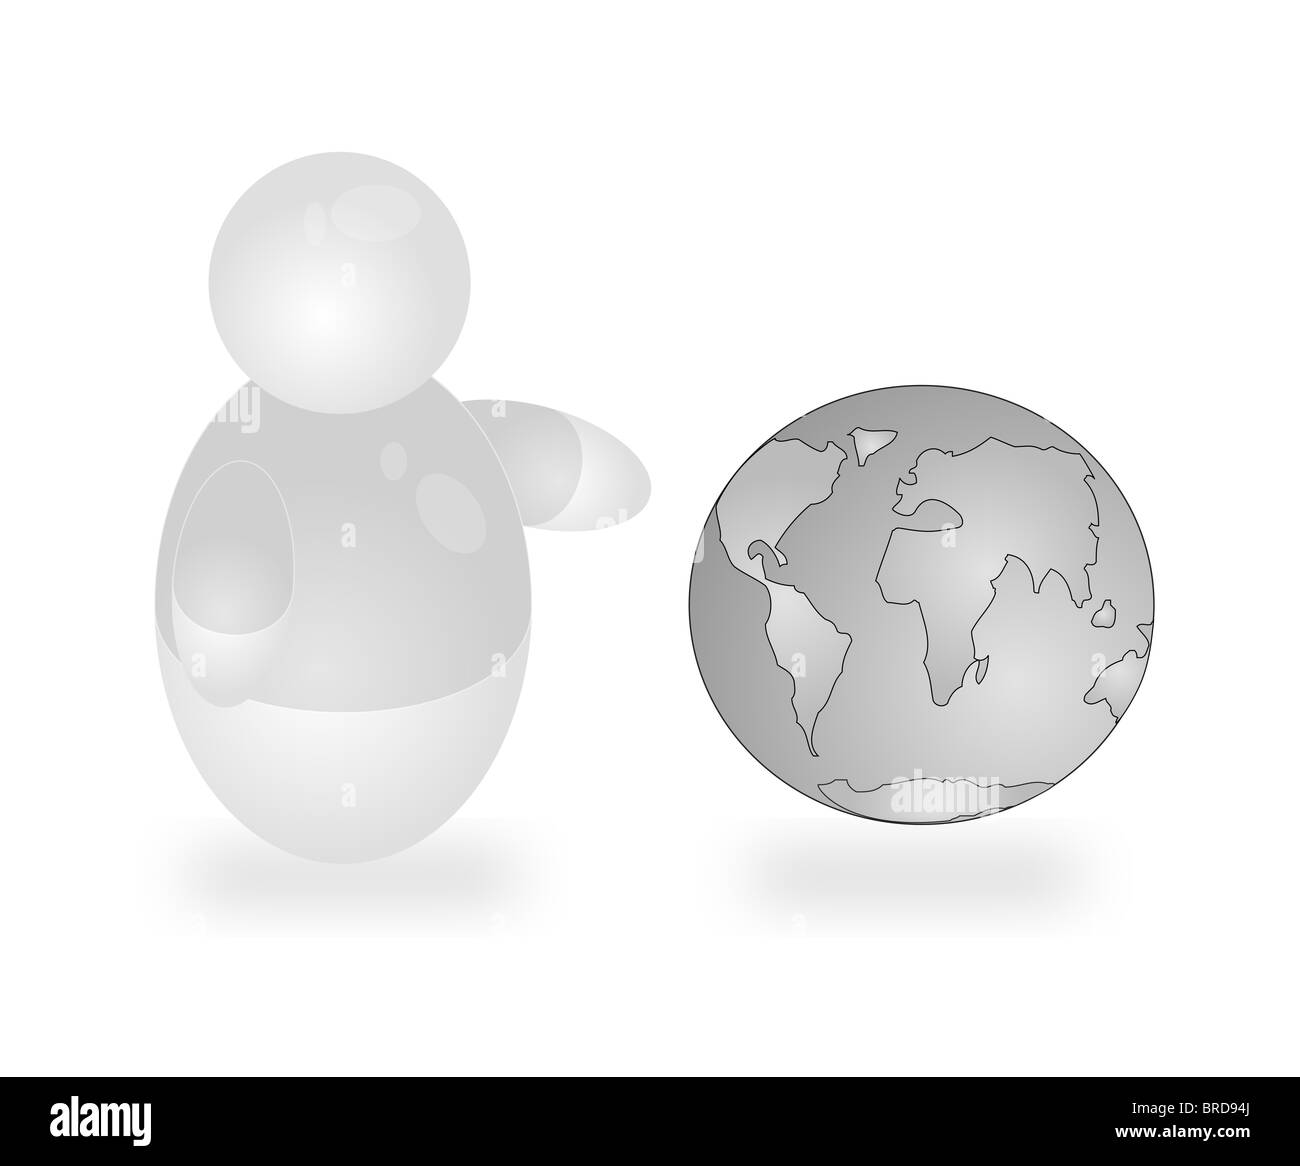 A stylized person pointing at the earth in grey tone. All isolated on white background. Stock Photo